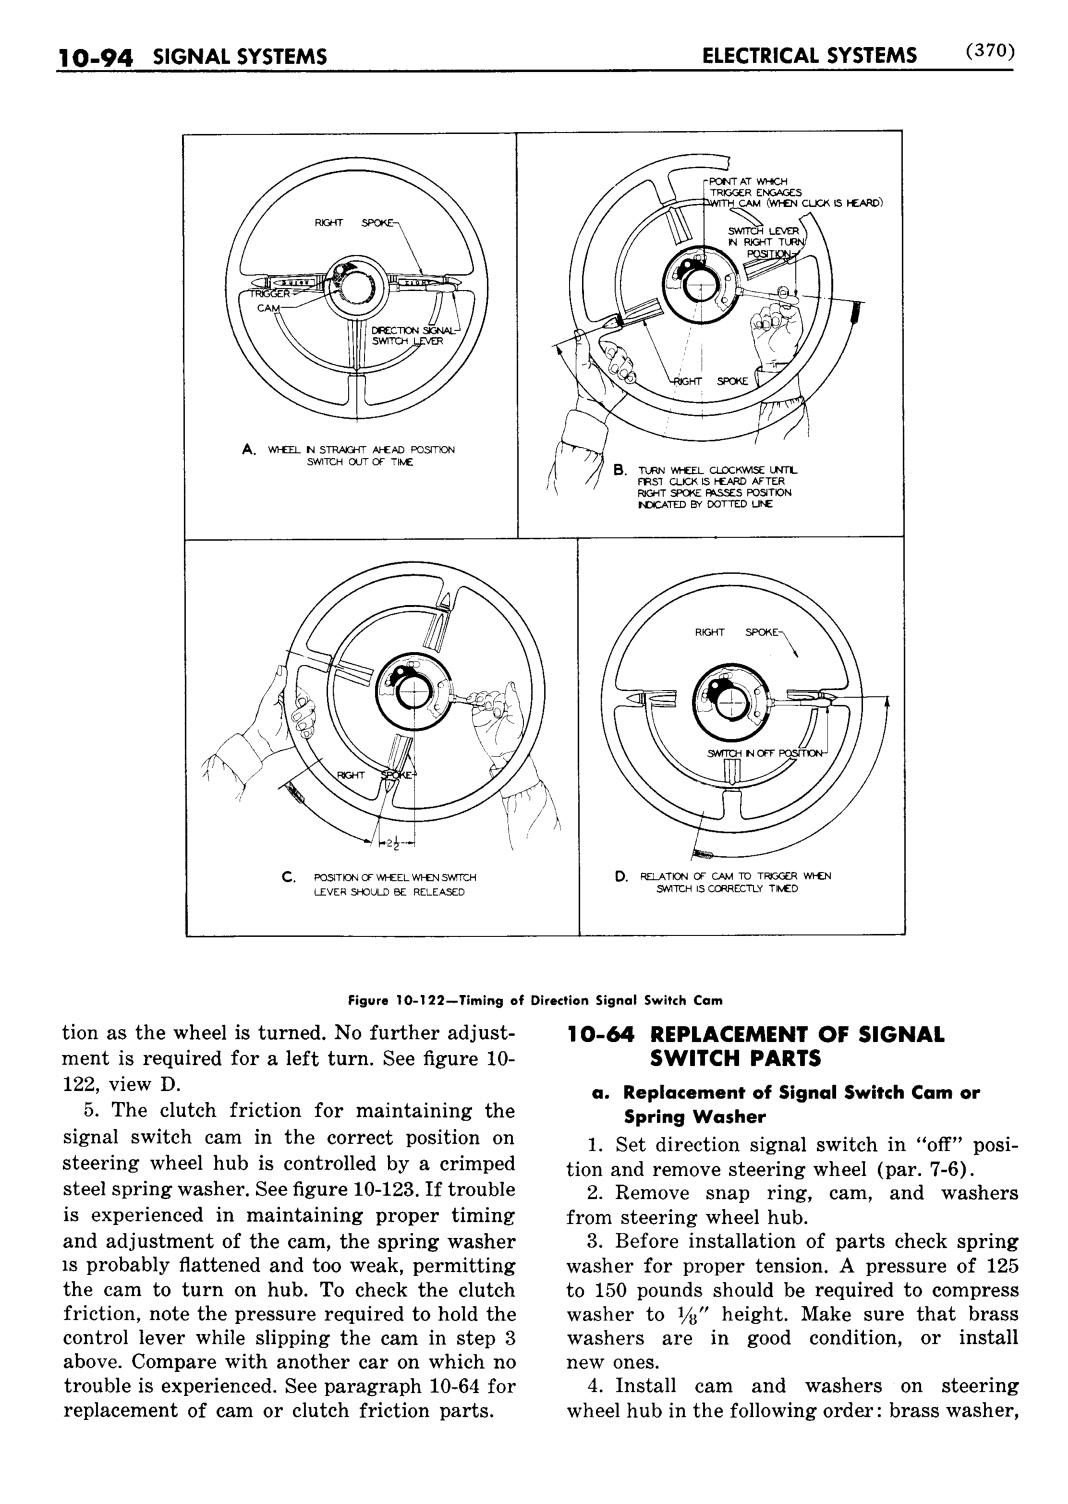 n_11 1948 Buick Shop Manual - Electrical Systems-094-094.jpg